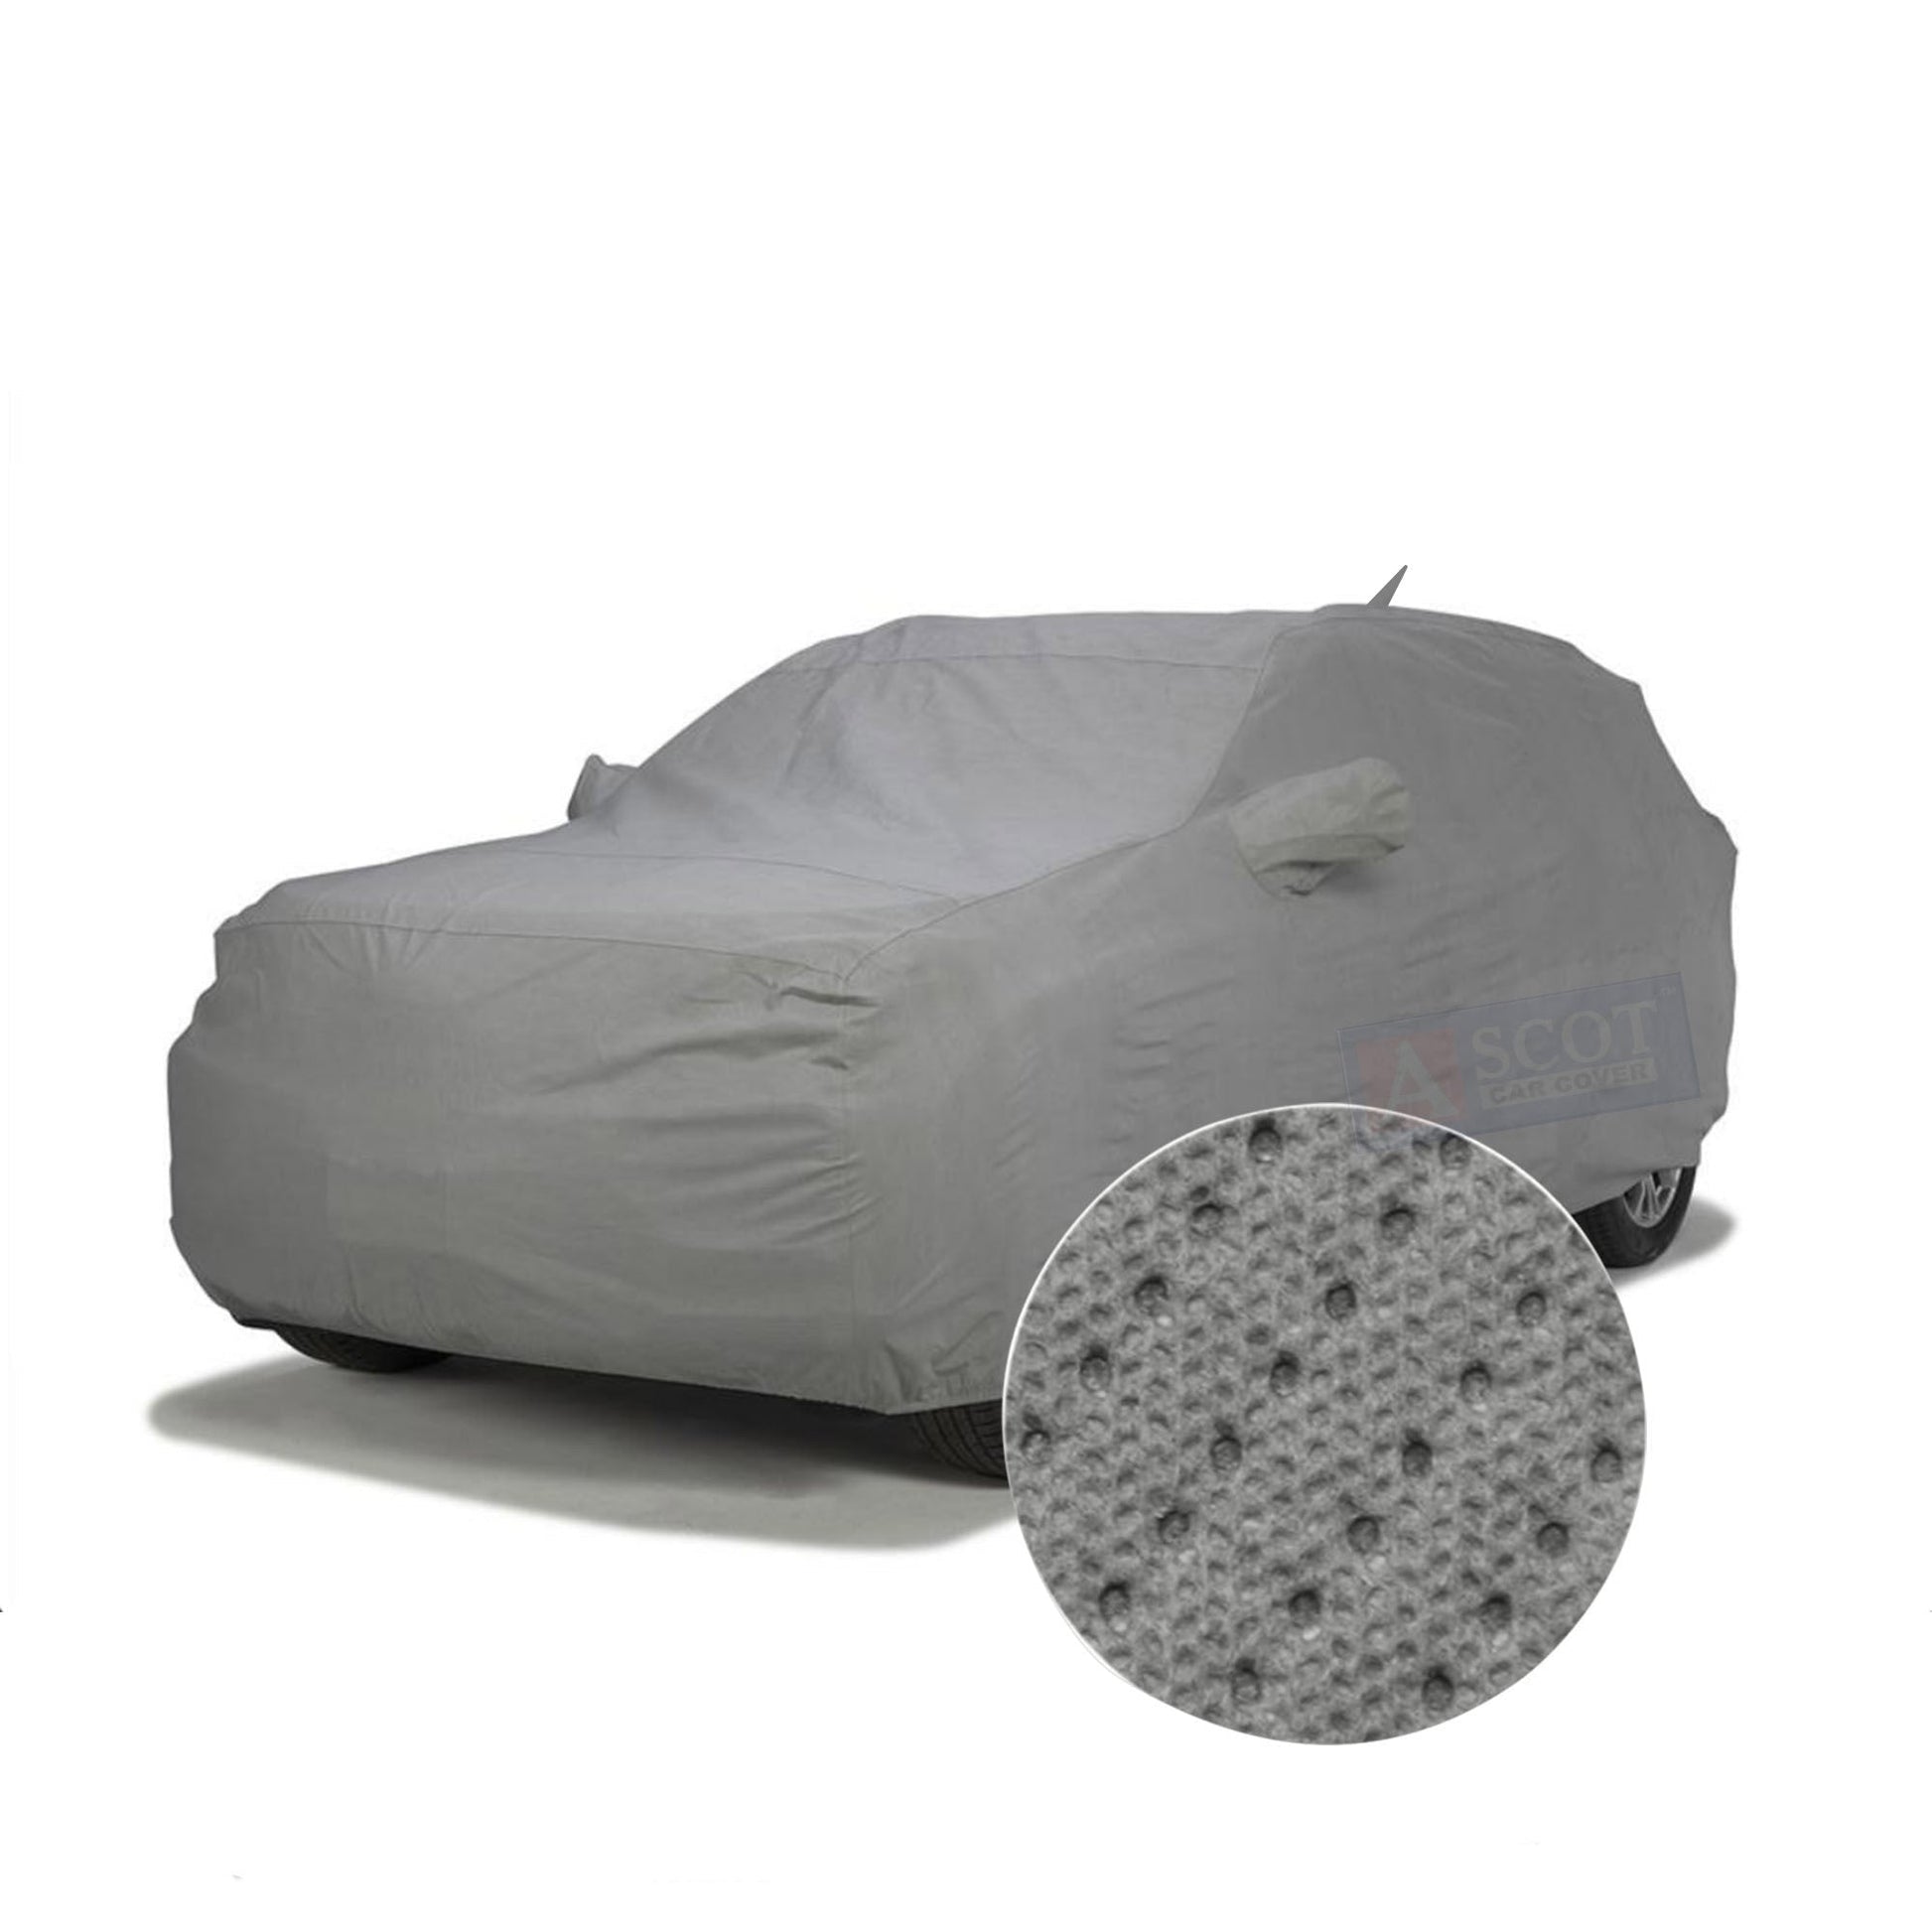 Volkswagen Polo GT car cover waterproof, car cover for GT polo